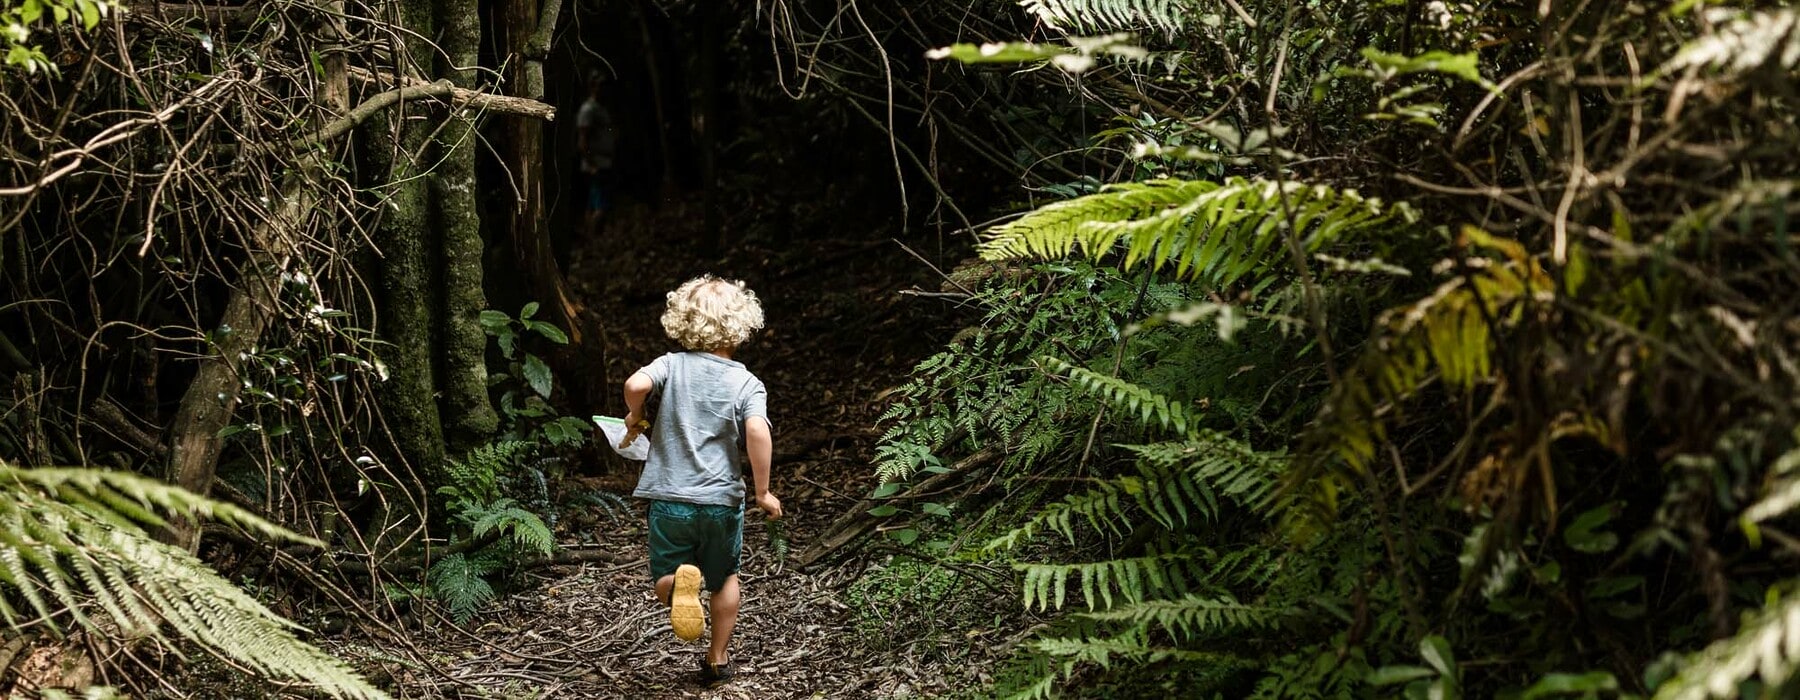 Young boy running into a lush forest